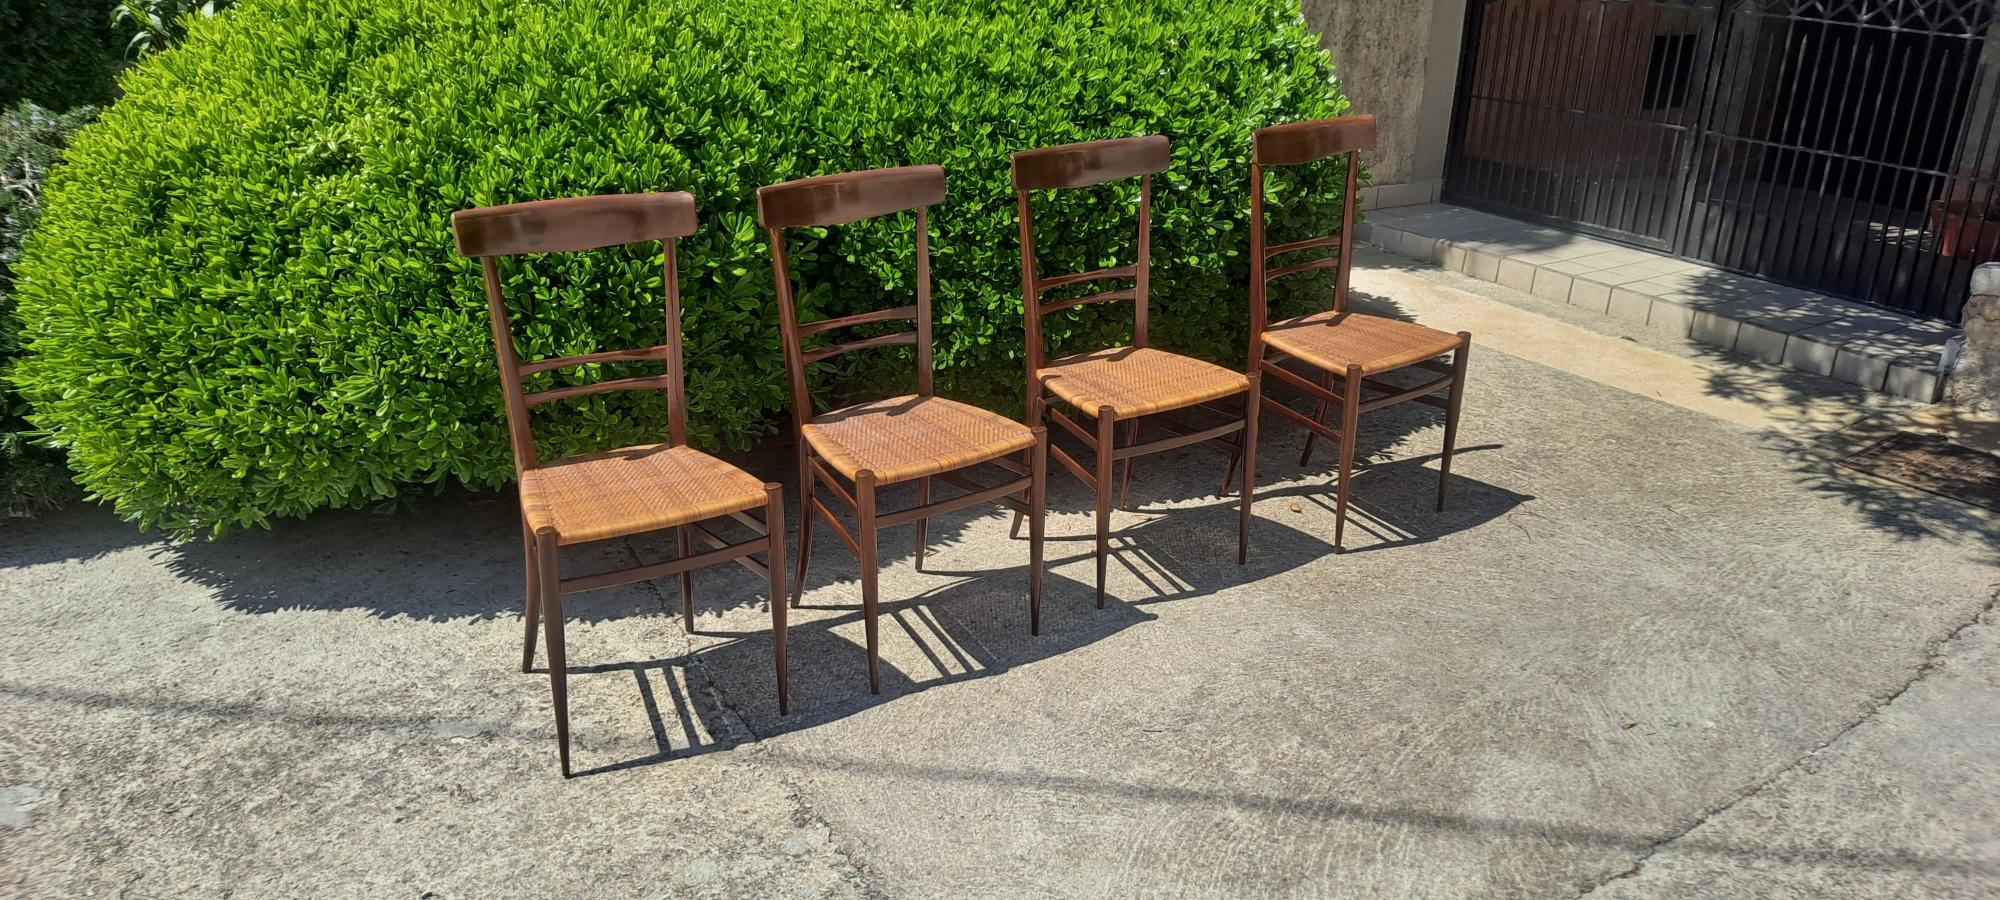 Set of 4 chairs attributed to Gio Ponti Leggera 646 , 1st Production 1951
we have 3 more chairs slightly different color. 
Measures: H36 H2 17.5 W 16 D.